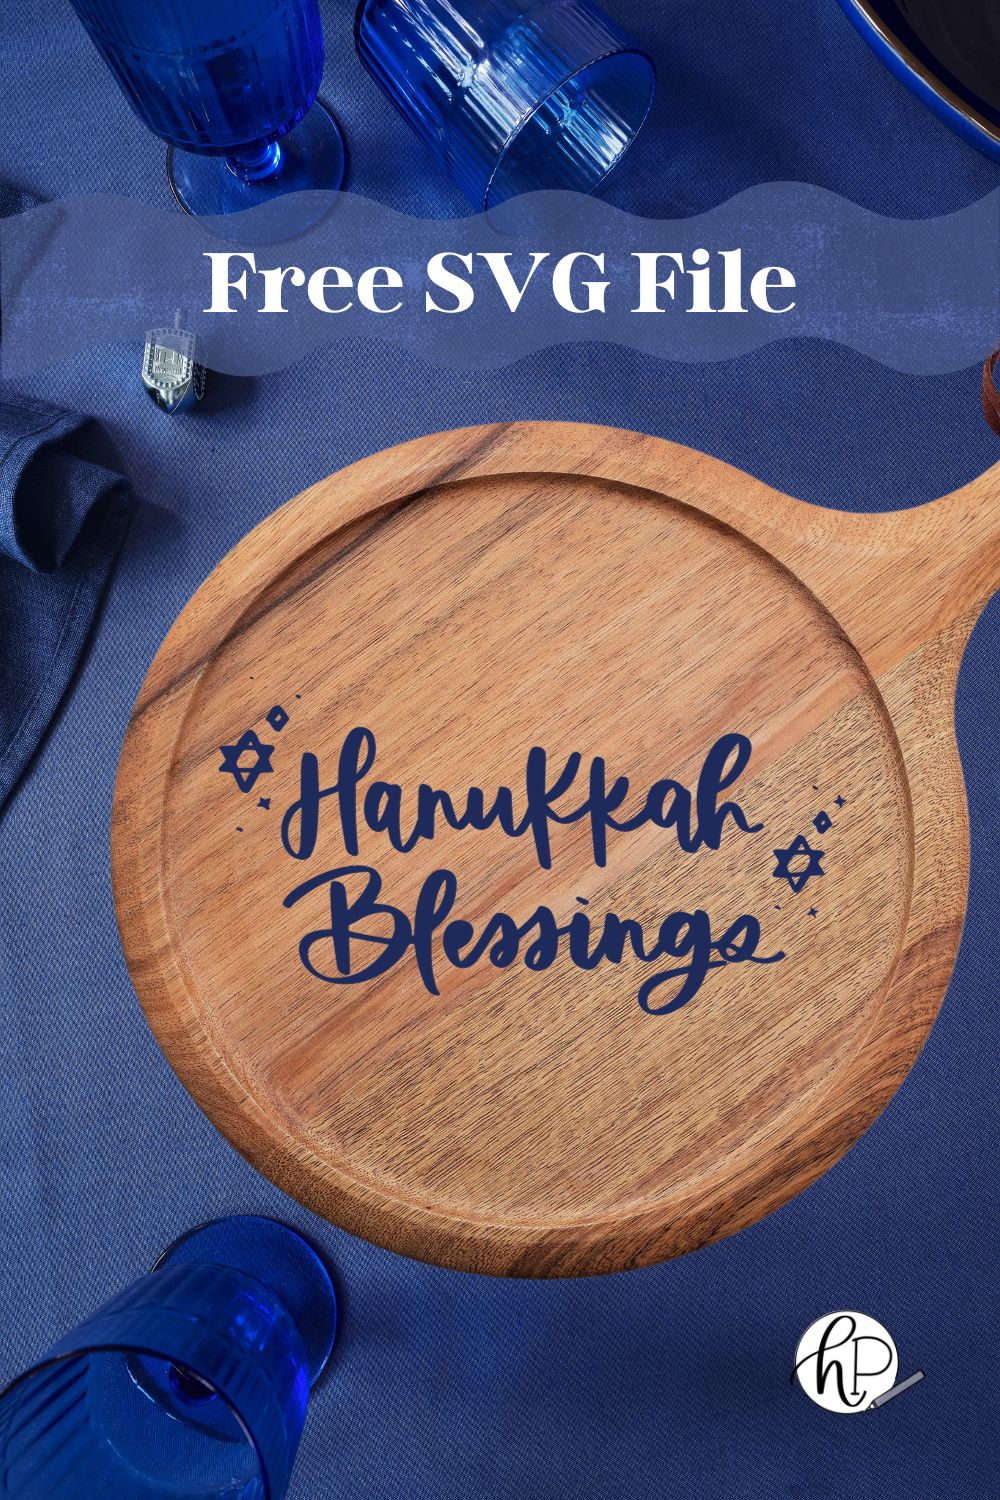 Hanukkah Blessings free SVG file for holiday crafting - shown on a wooden serving board